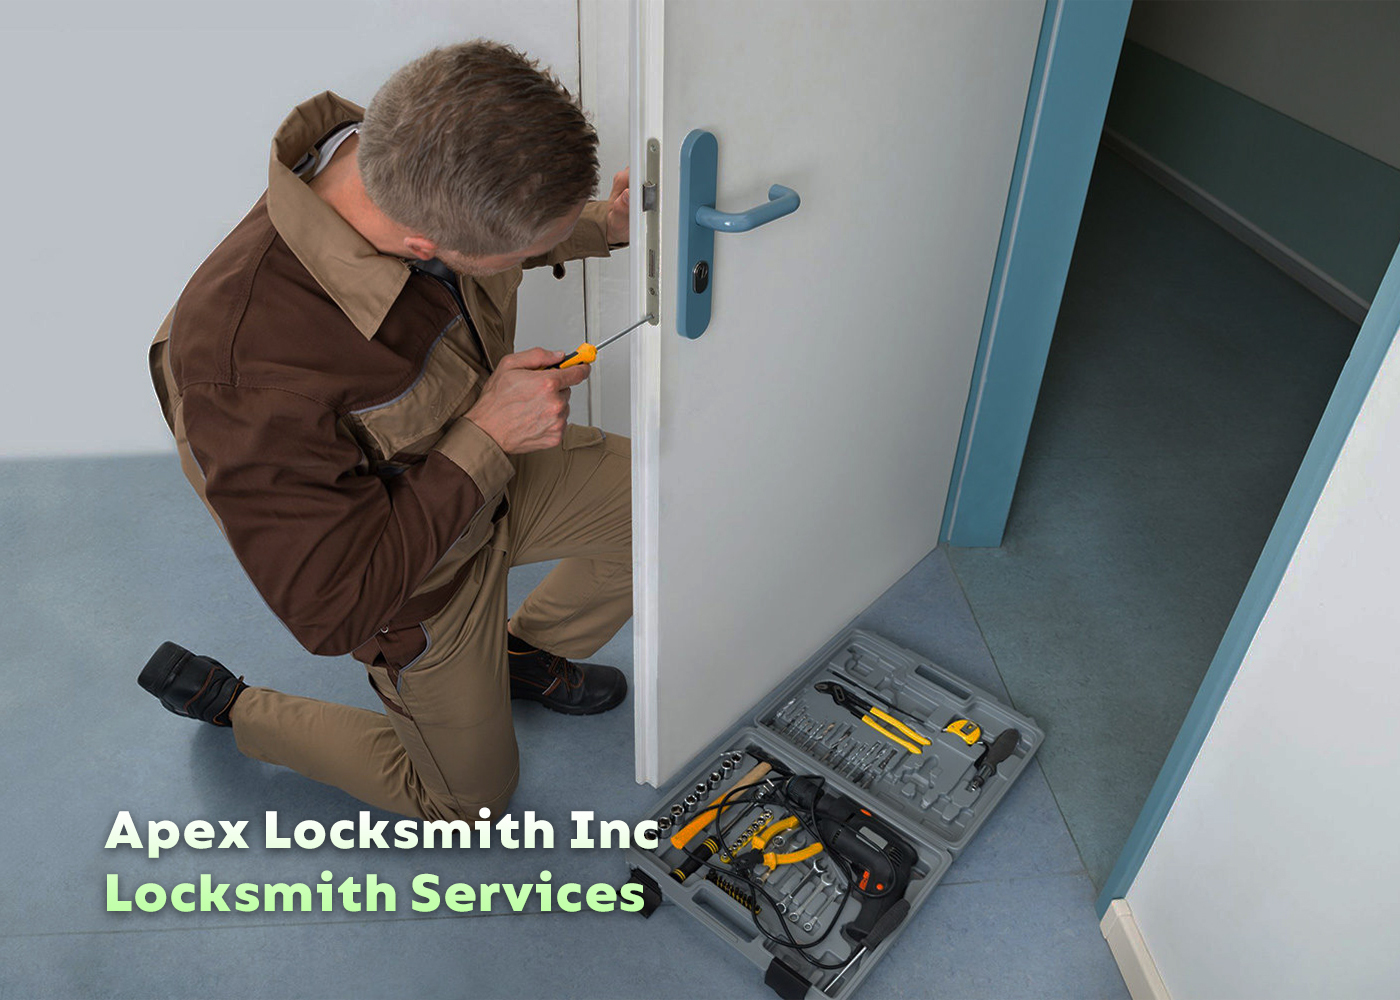 You are currently viewing The Absolute Guide of Union, New Jersey Locksmith Services